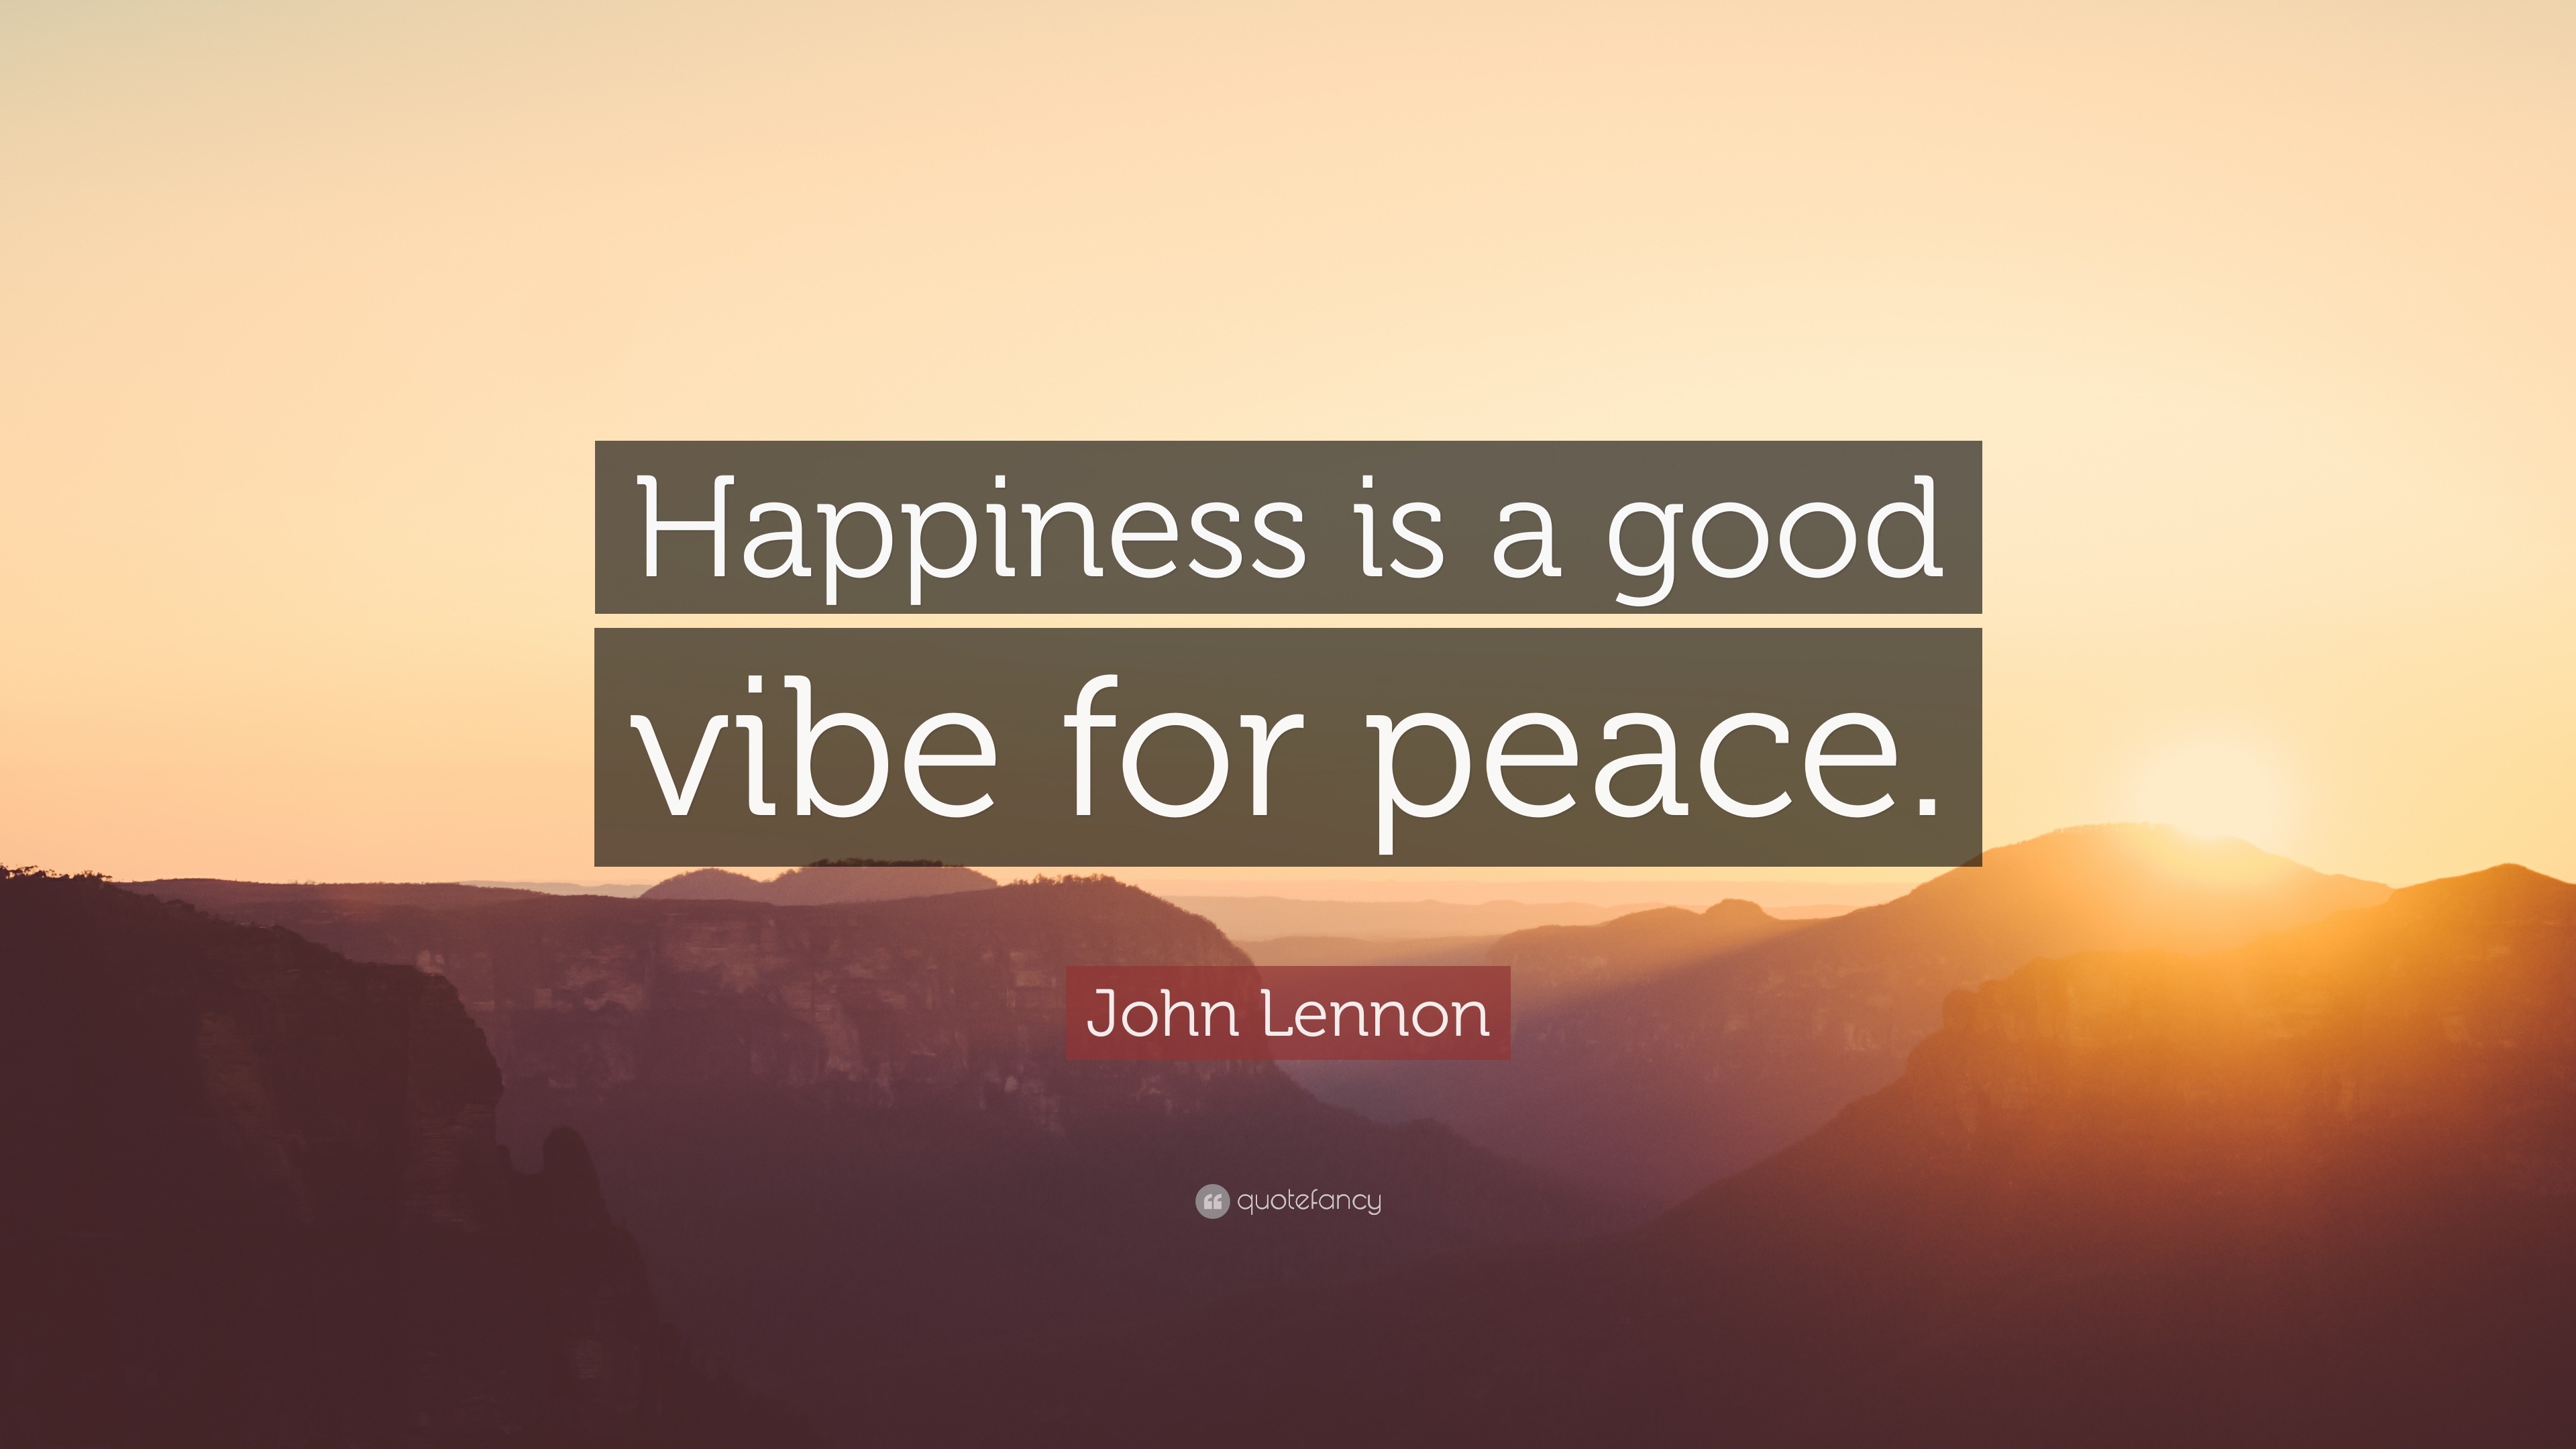 John Lennon Quote: “Happiness is a good vibe for peace.”